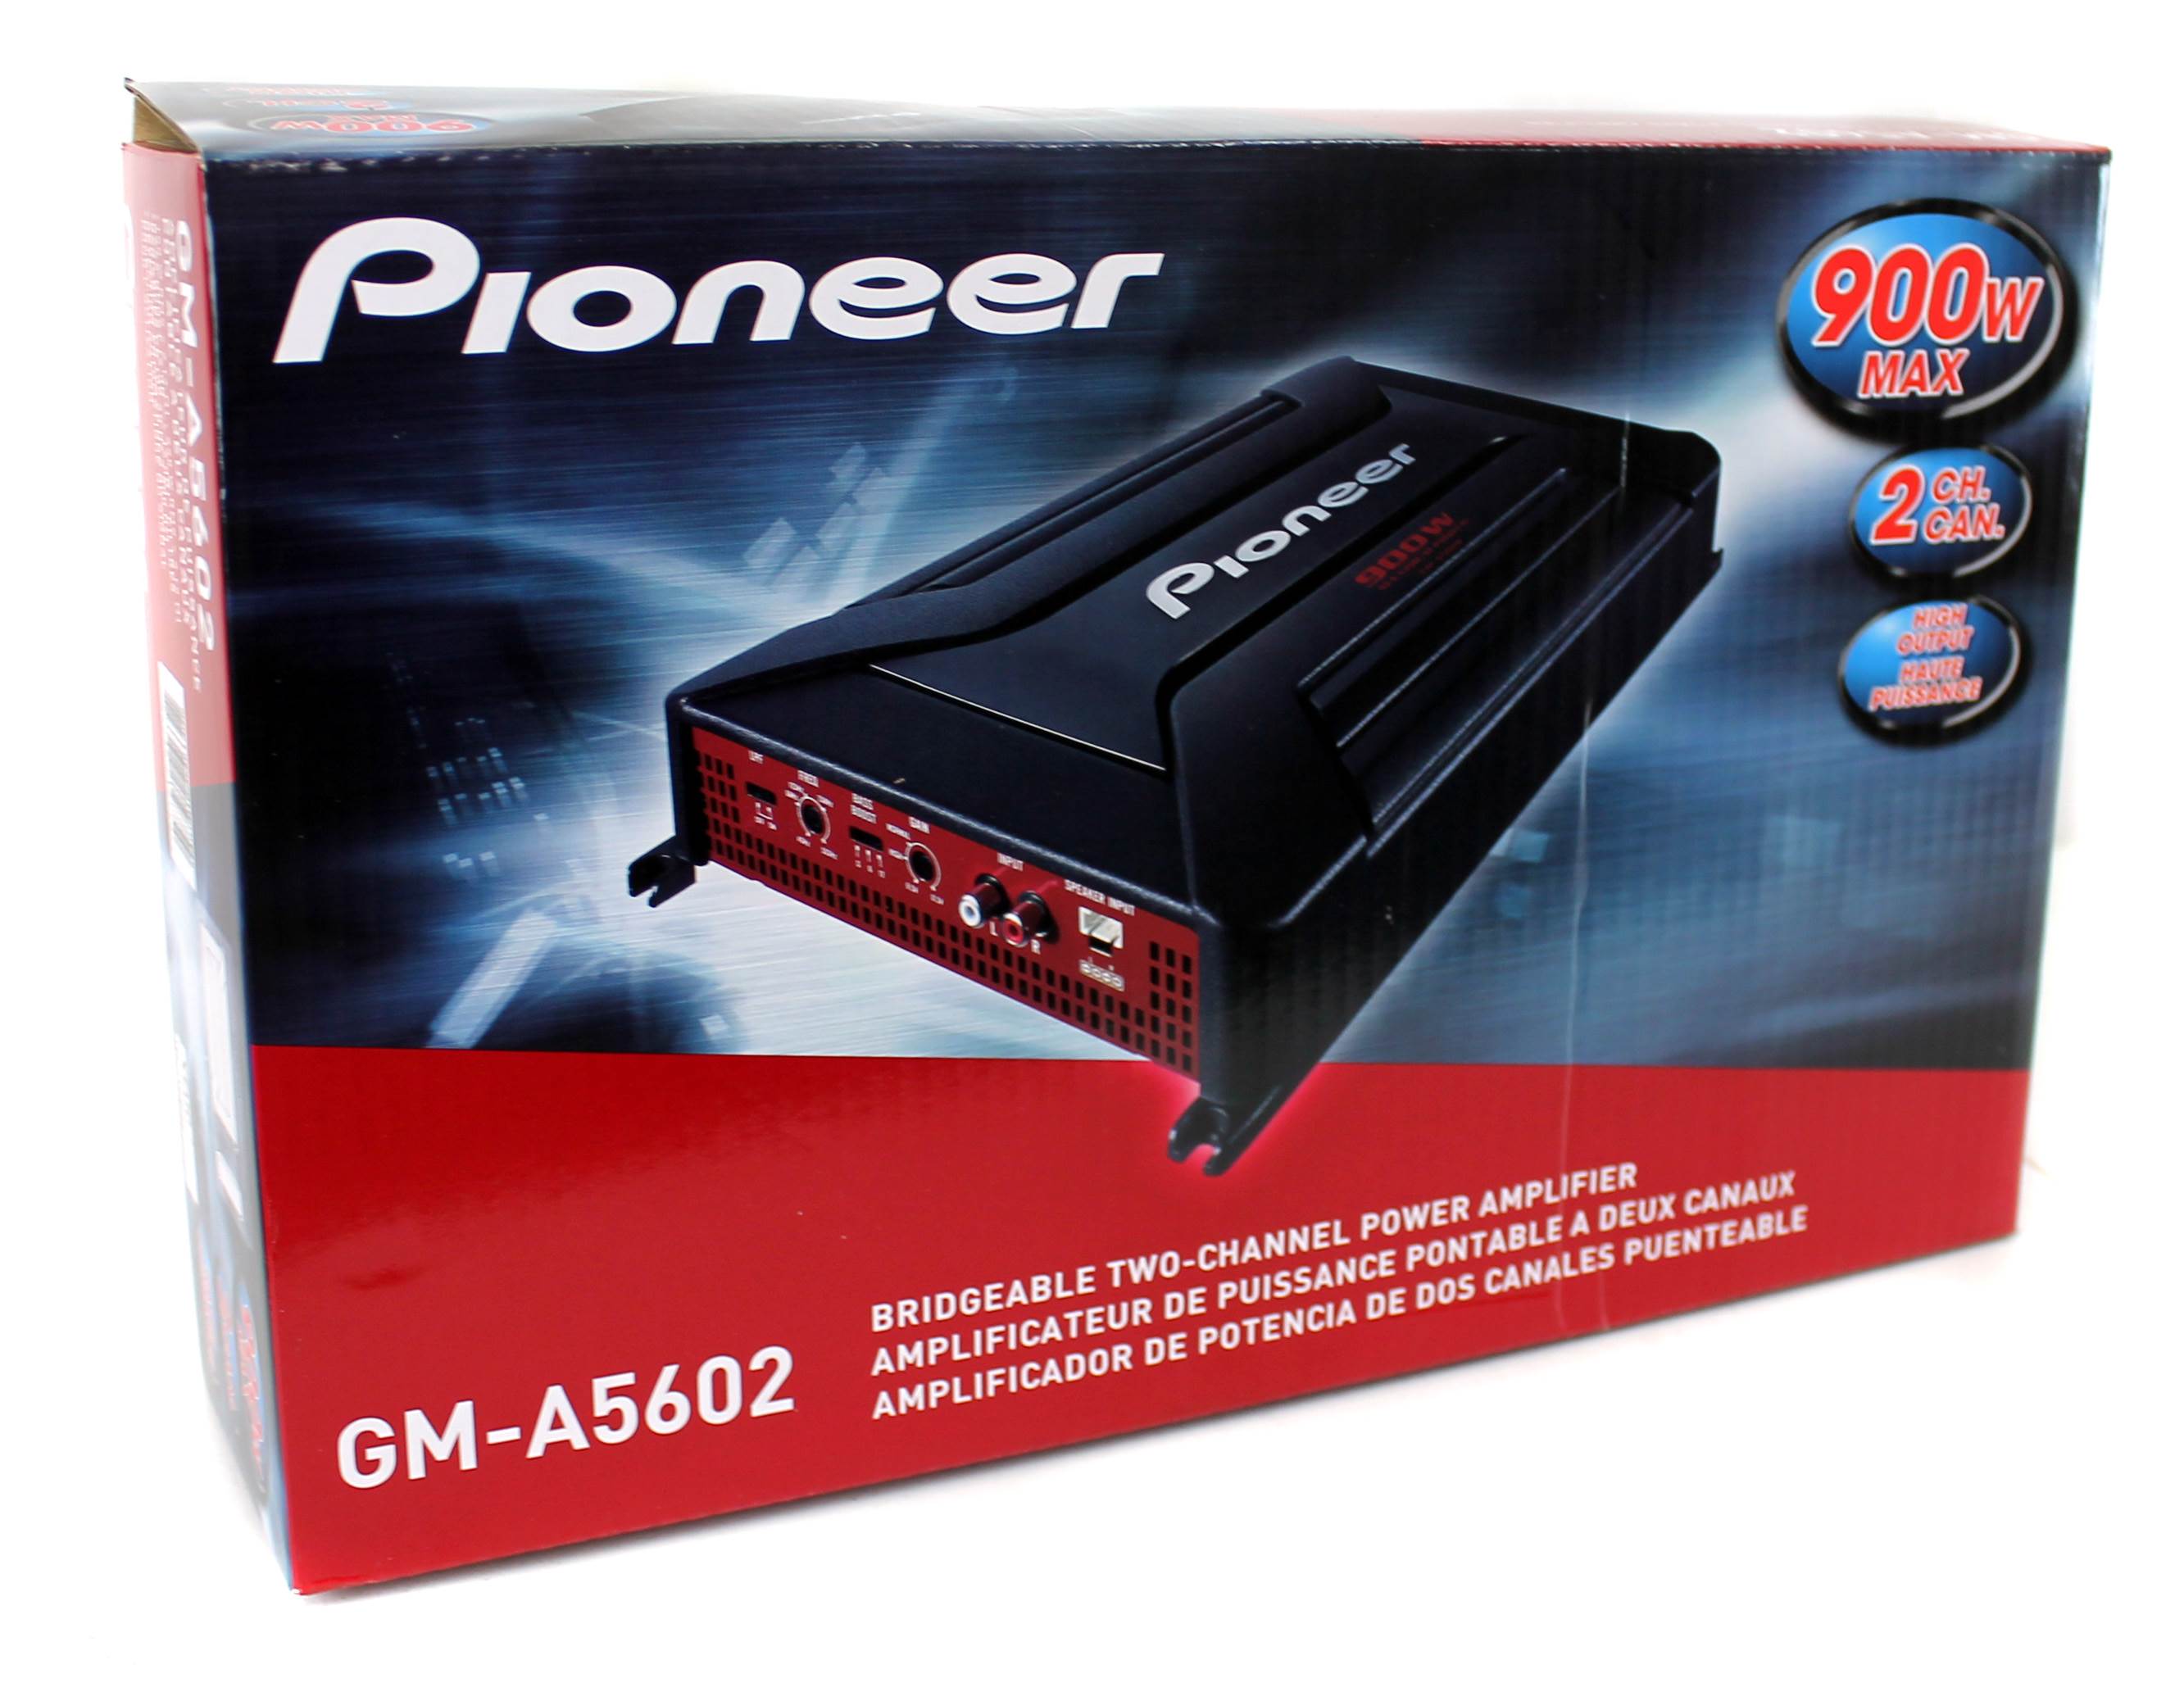 Pioneer GM-A5602 2-Channel Bridgeable Amplifier with 900 Watts Max Power and Bass Boost Control - image 5 of 5